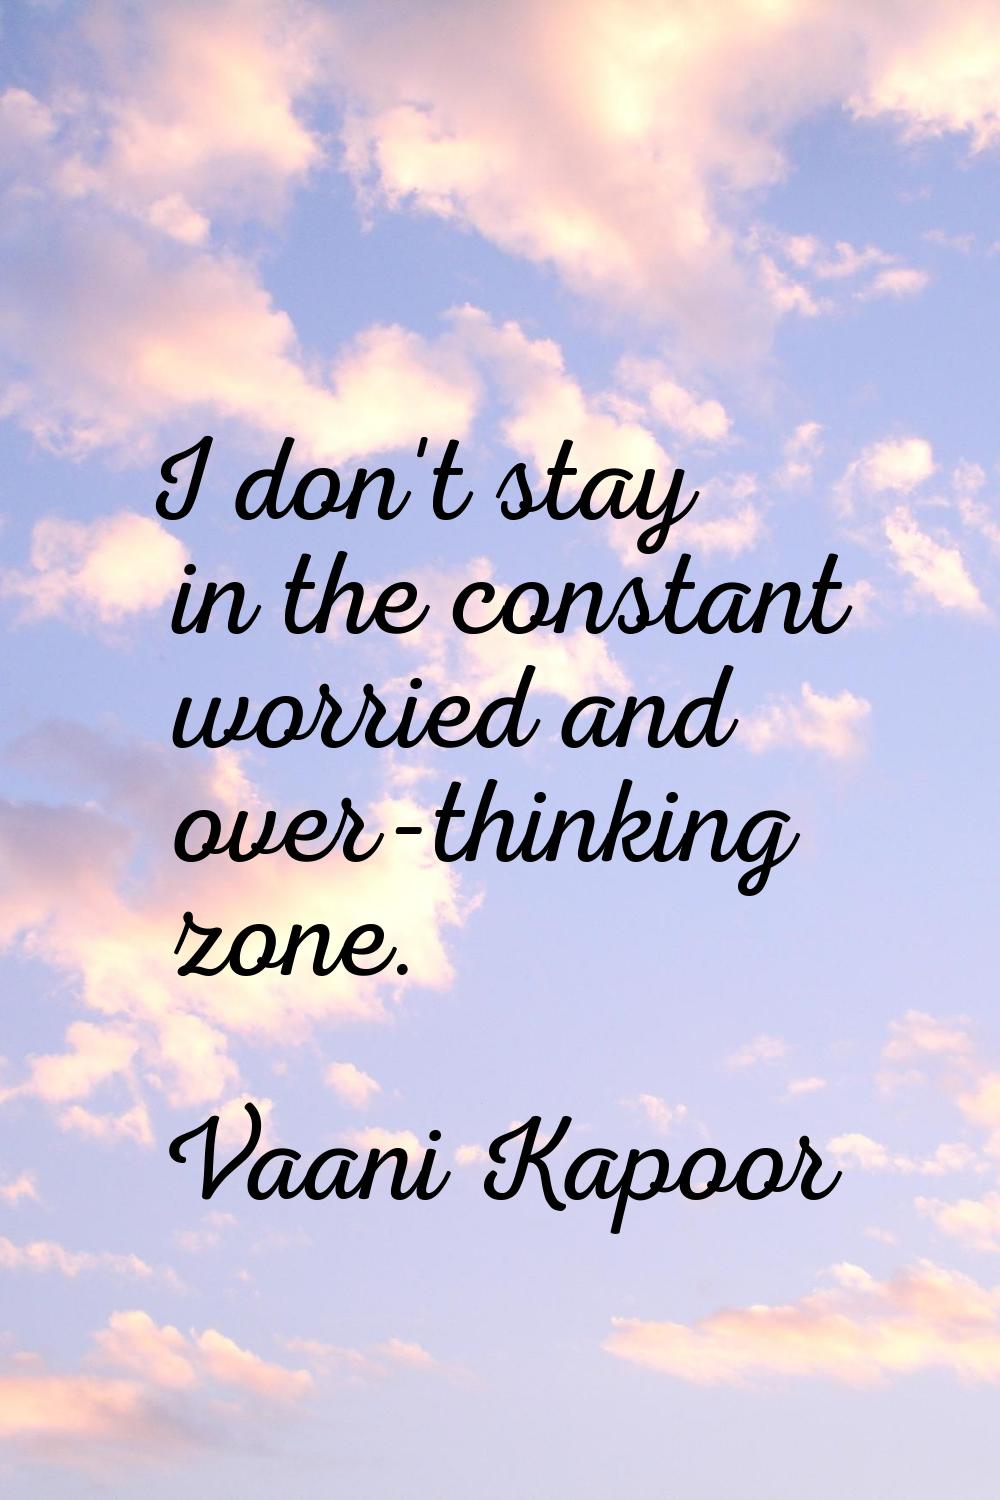 I don't stay in the constant worried and over-thinking zone.